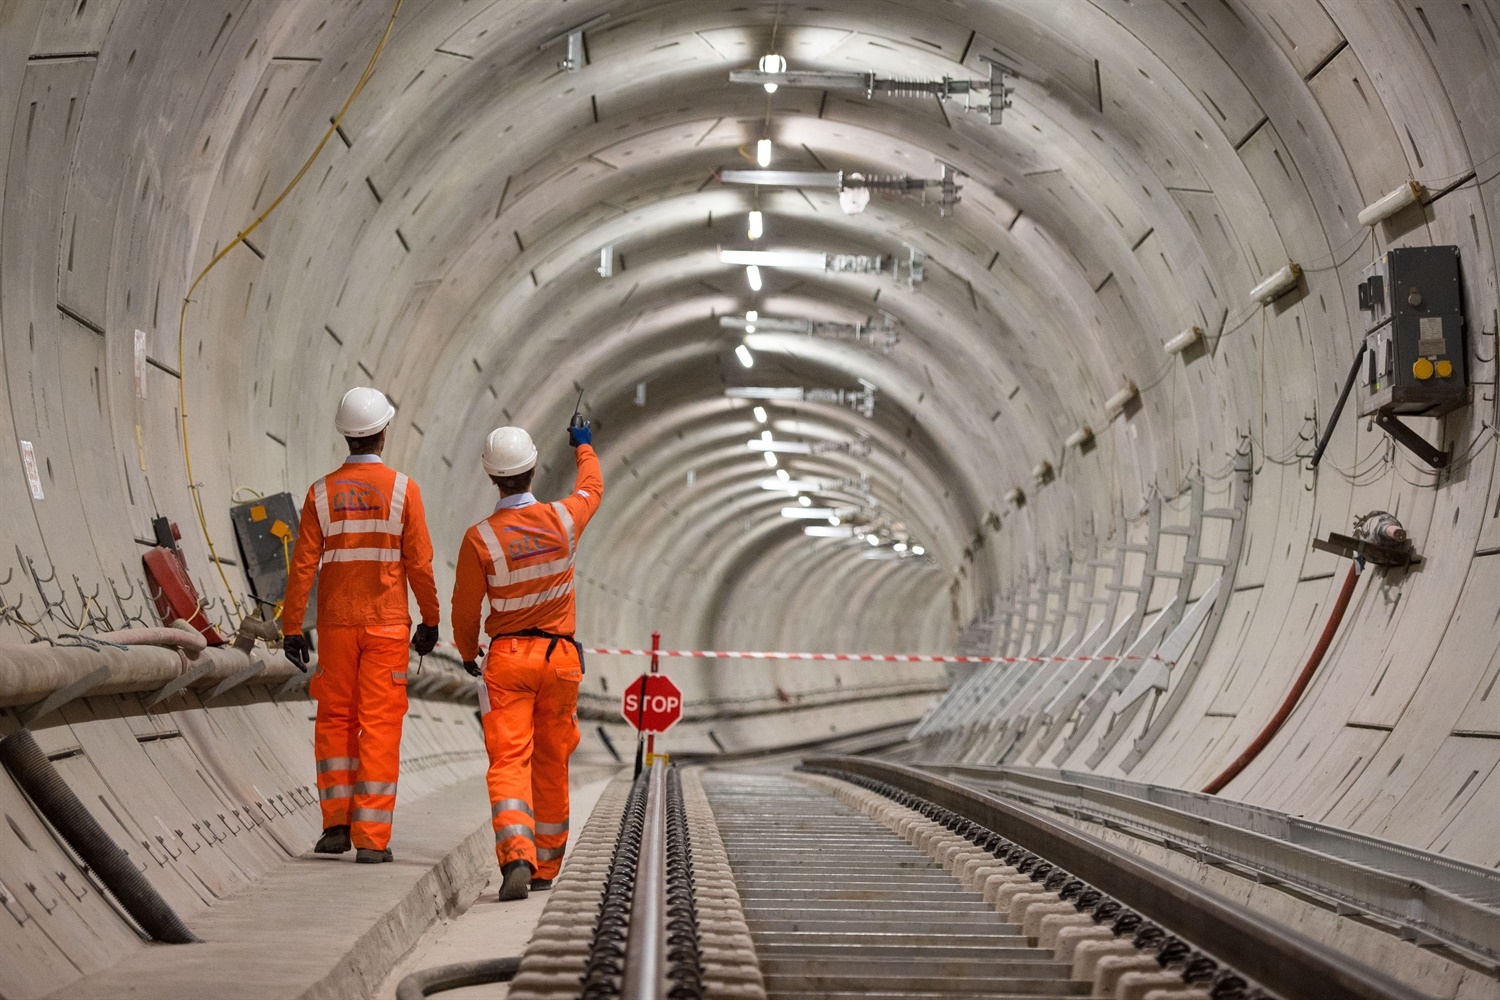 MPs ‘not convinced’ two-year delay and £3bn overspend will be enough as committee slams Crossrail’s ‘disastrous’ governance